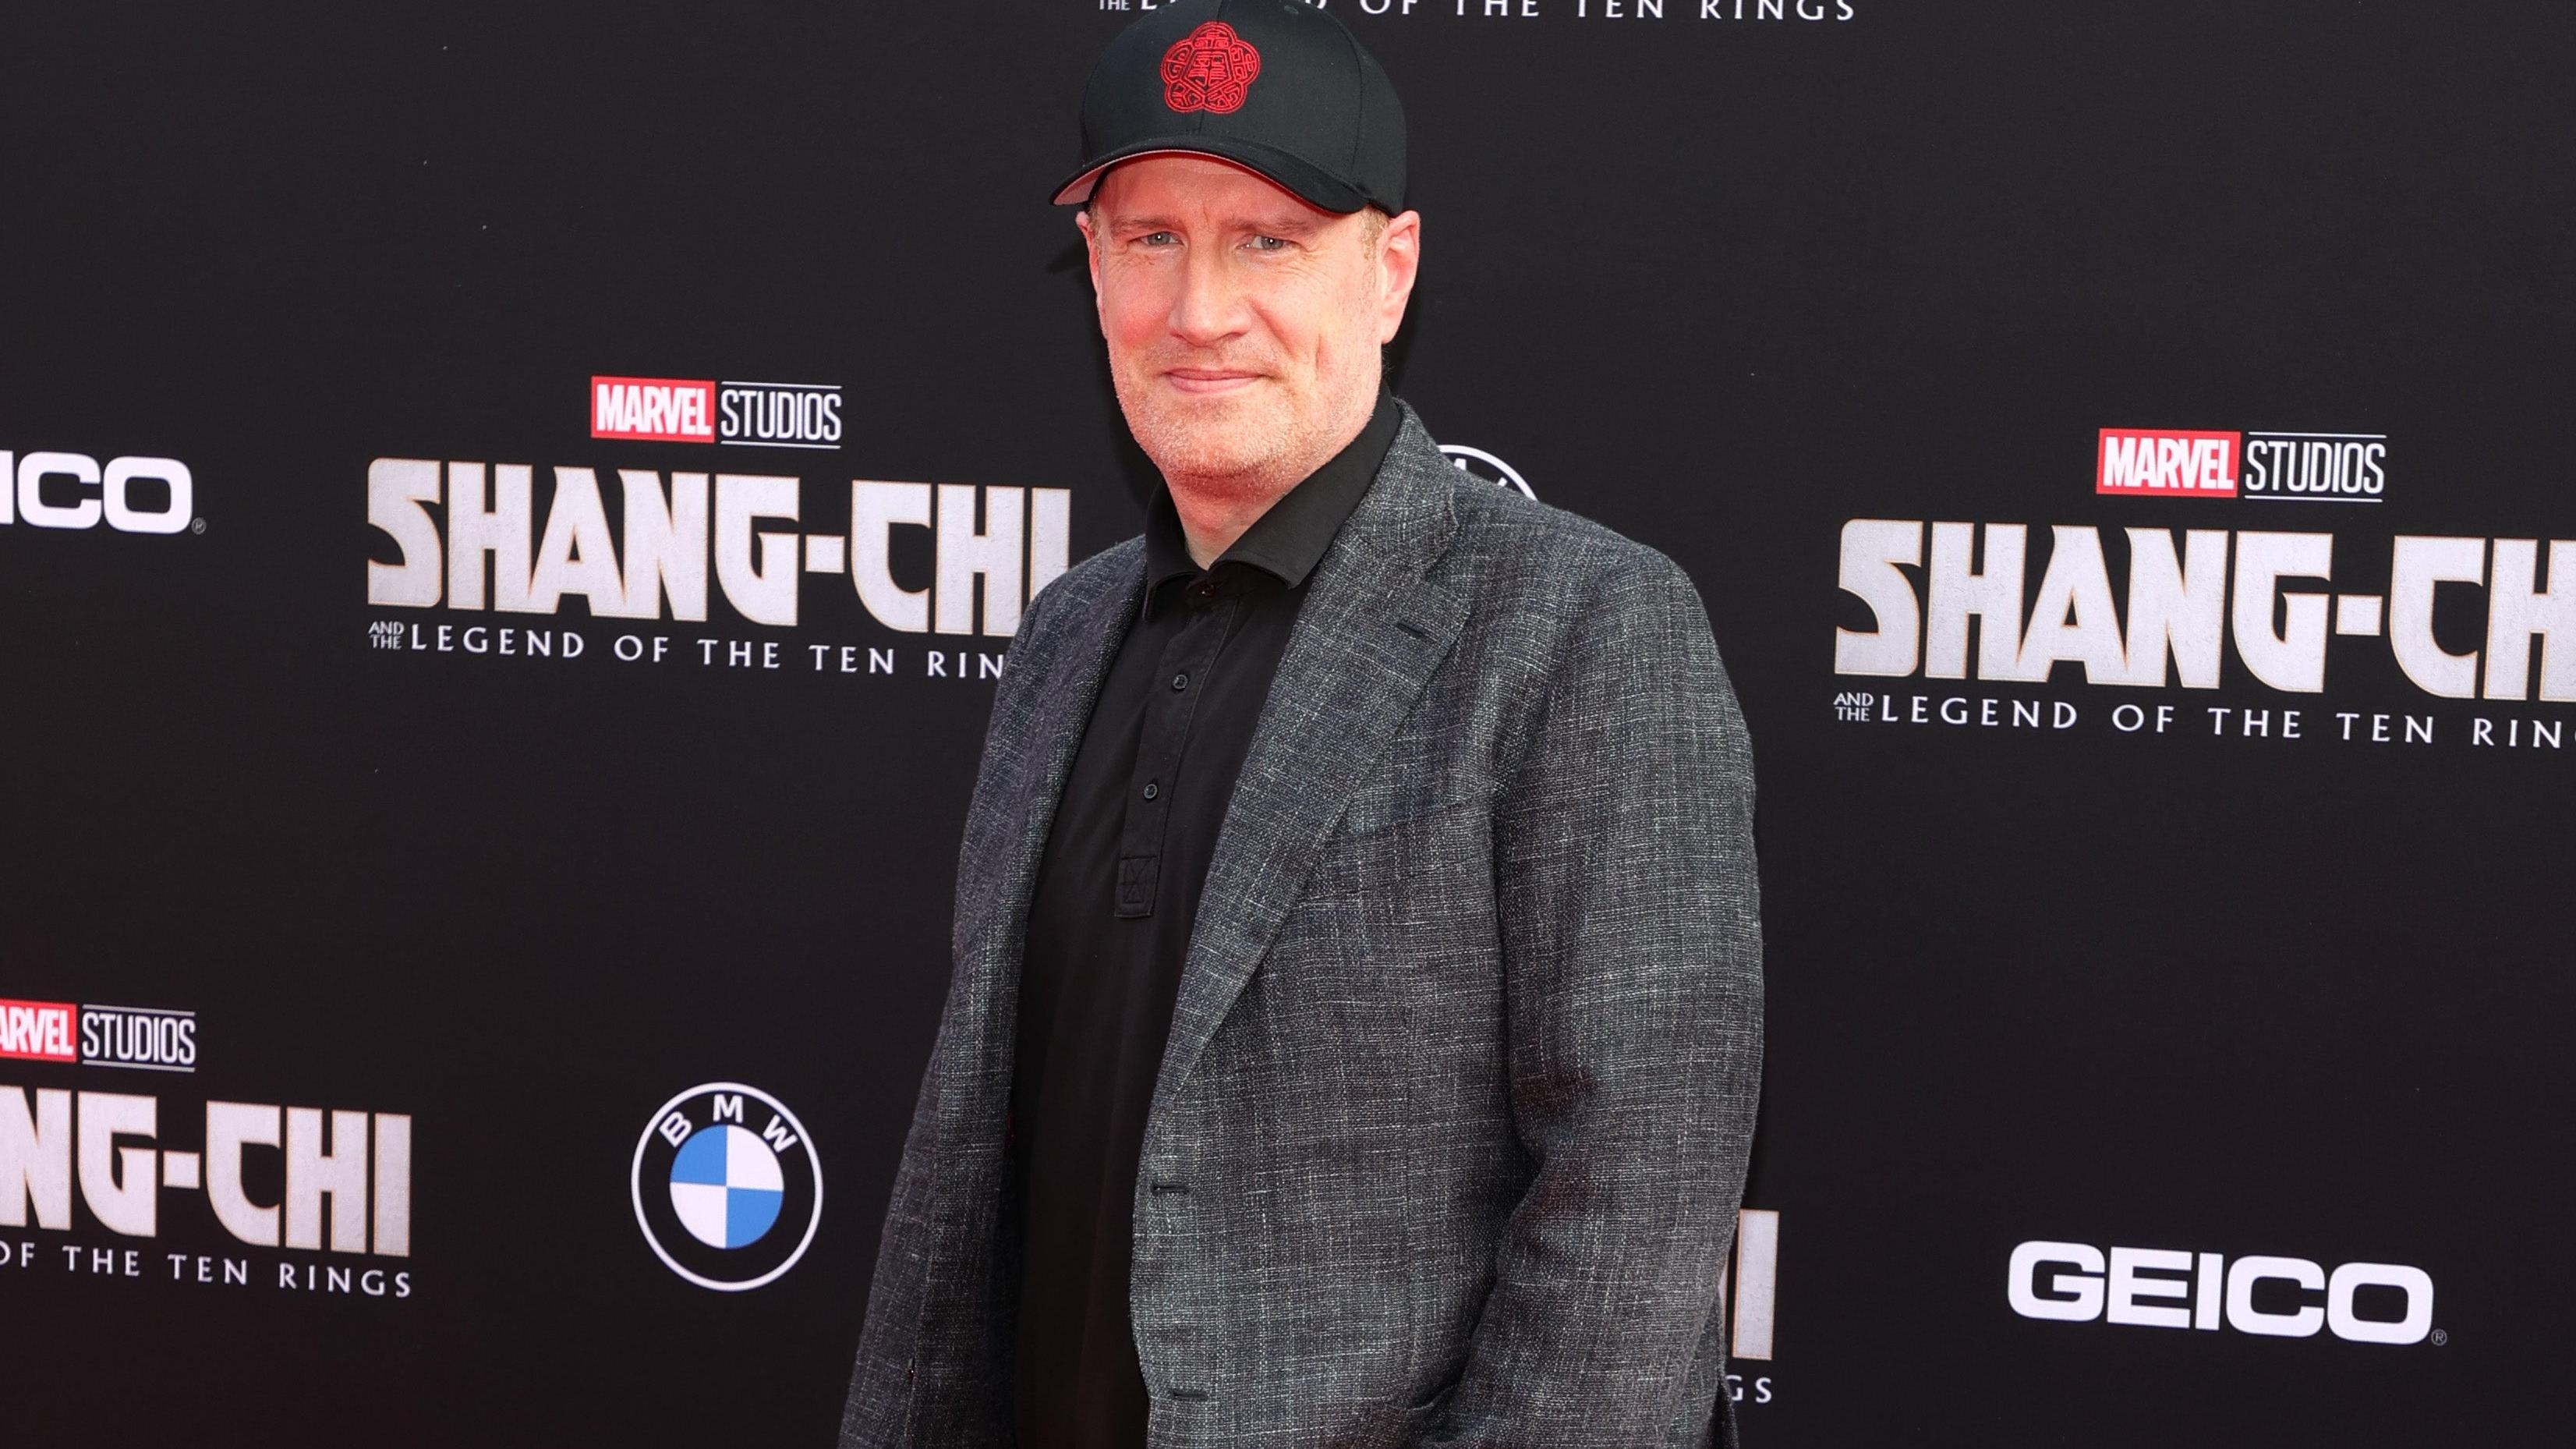 Kevin Feige weighs in on Shang-Chi controversy, Scarlett Johansson lawsuit